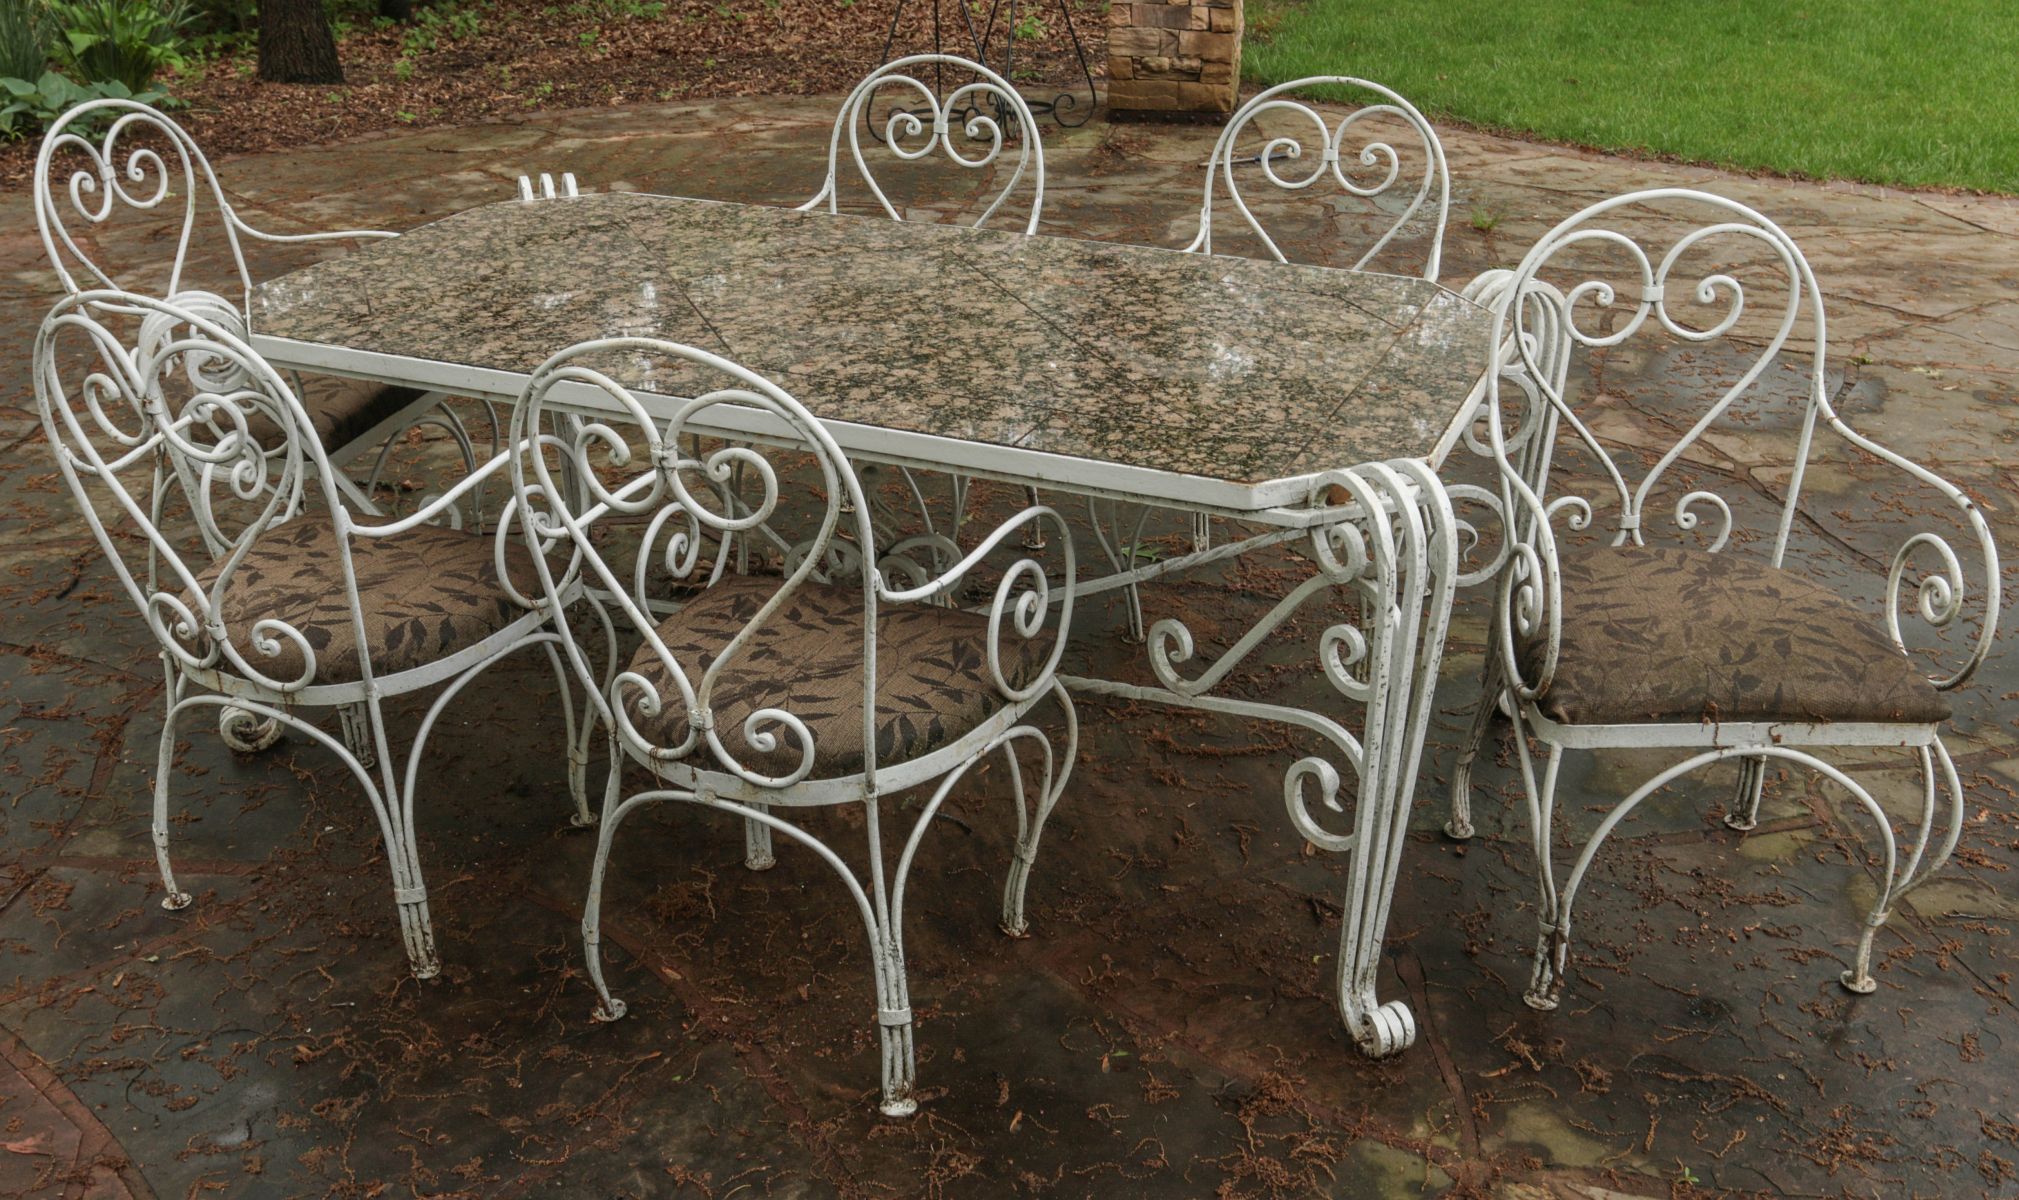 A SEVEN PIECE IRON PATIO SET WITH GRANITE TILE TOP